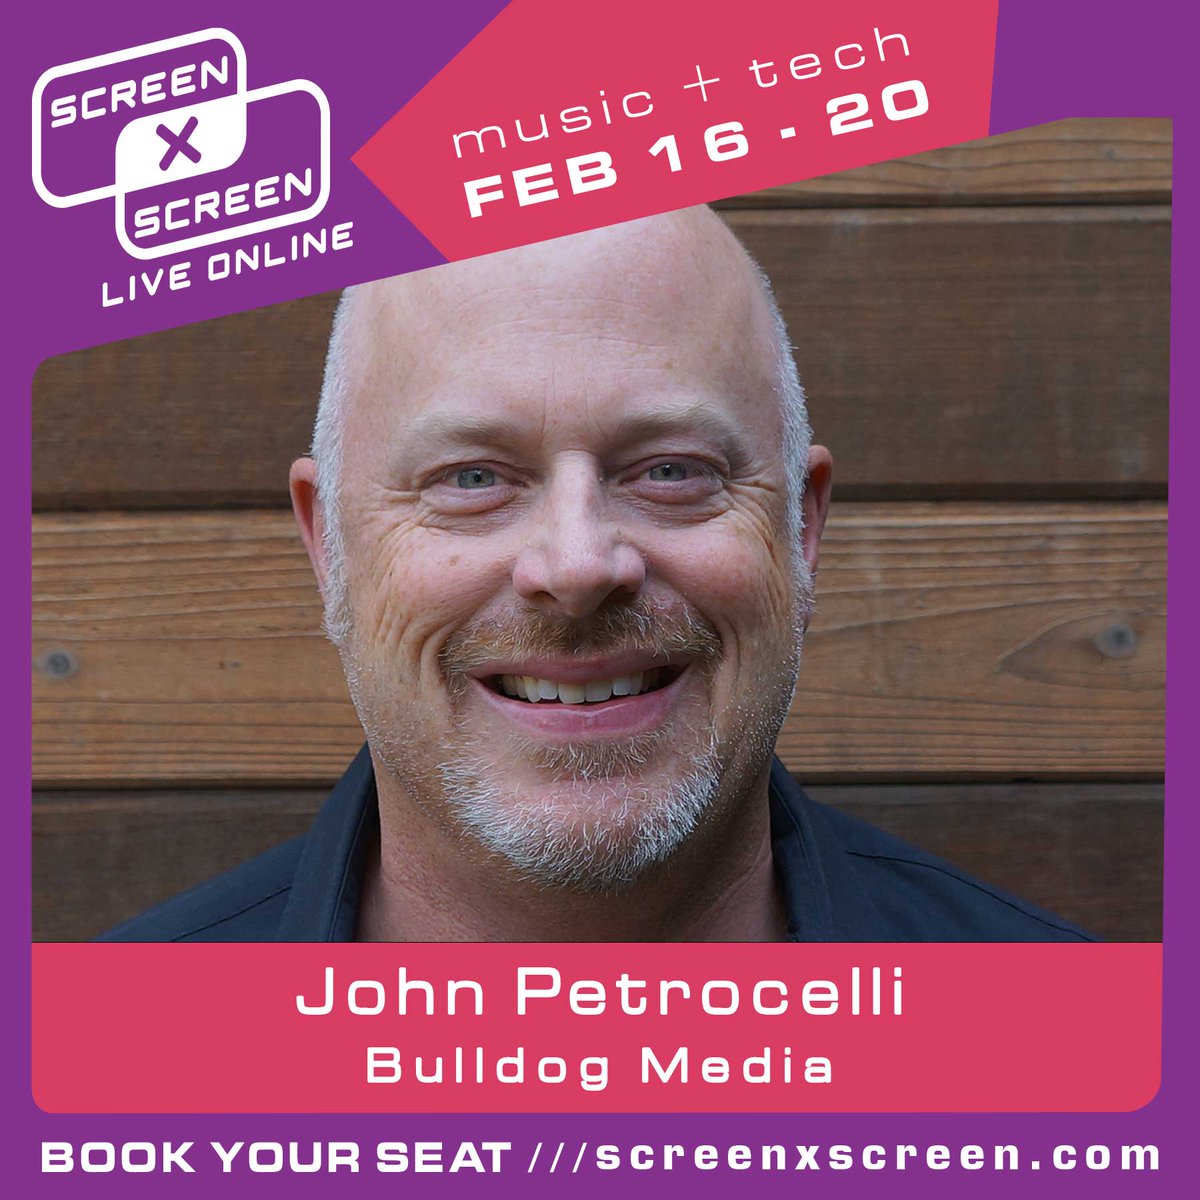 Looking forward to having John Petrocelli from Bulldog DM join us for SCREEN x SCREEN!

TUES FEB 16 - SAT FEB 20
Online conference
LINK IN BIO!!

@darrylhurs #streaming #SXS21 #screenxscreen #online #musicindustry #musicmonetization #music #artists #AI #producers